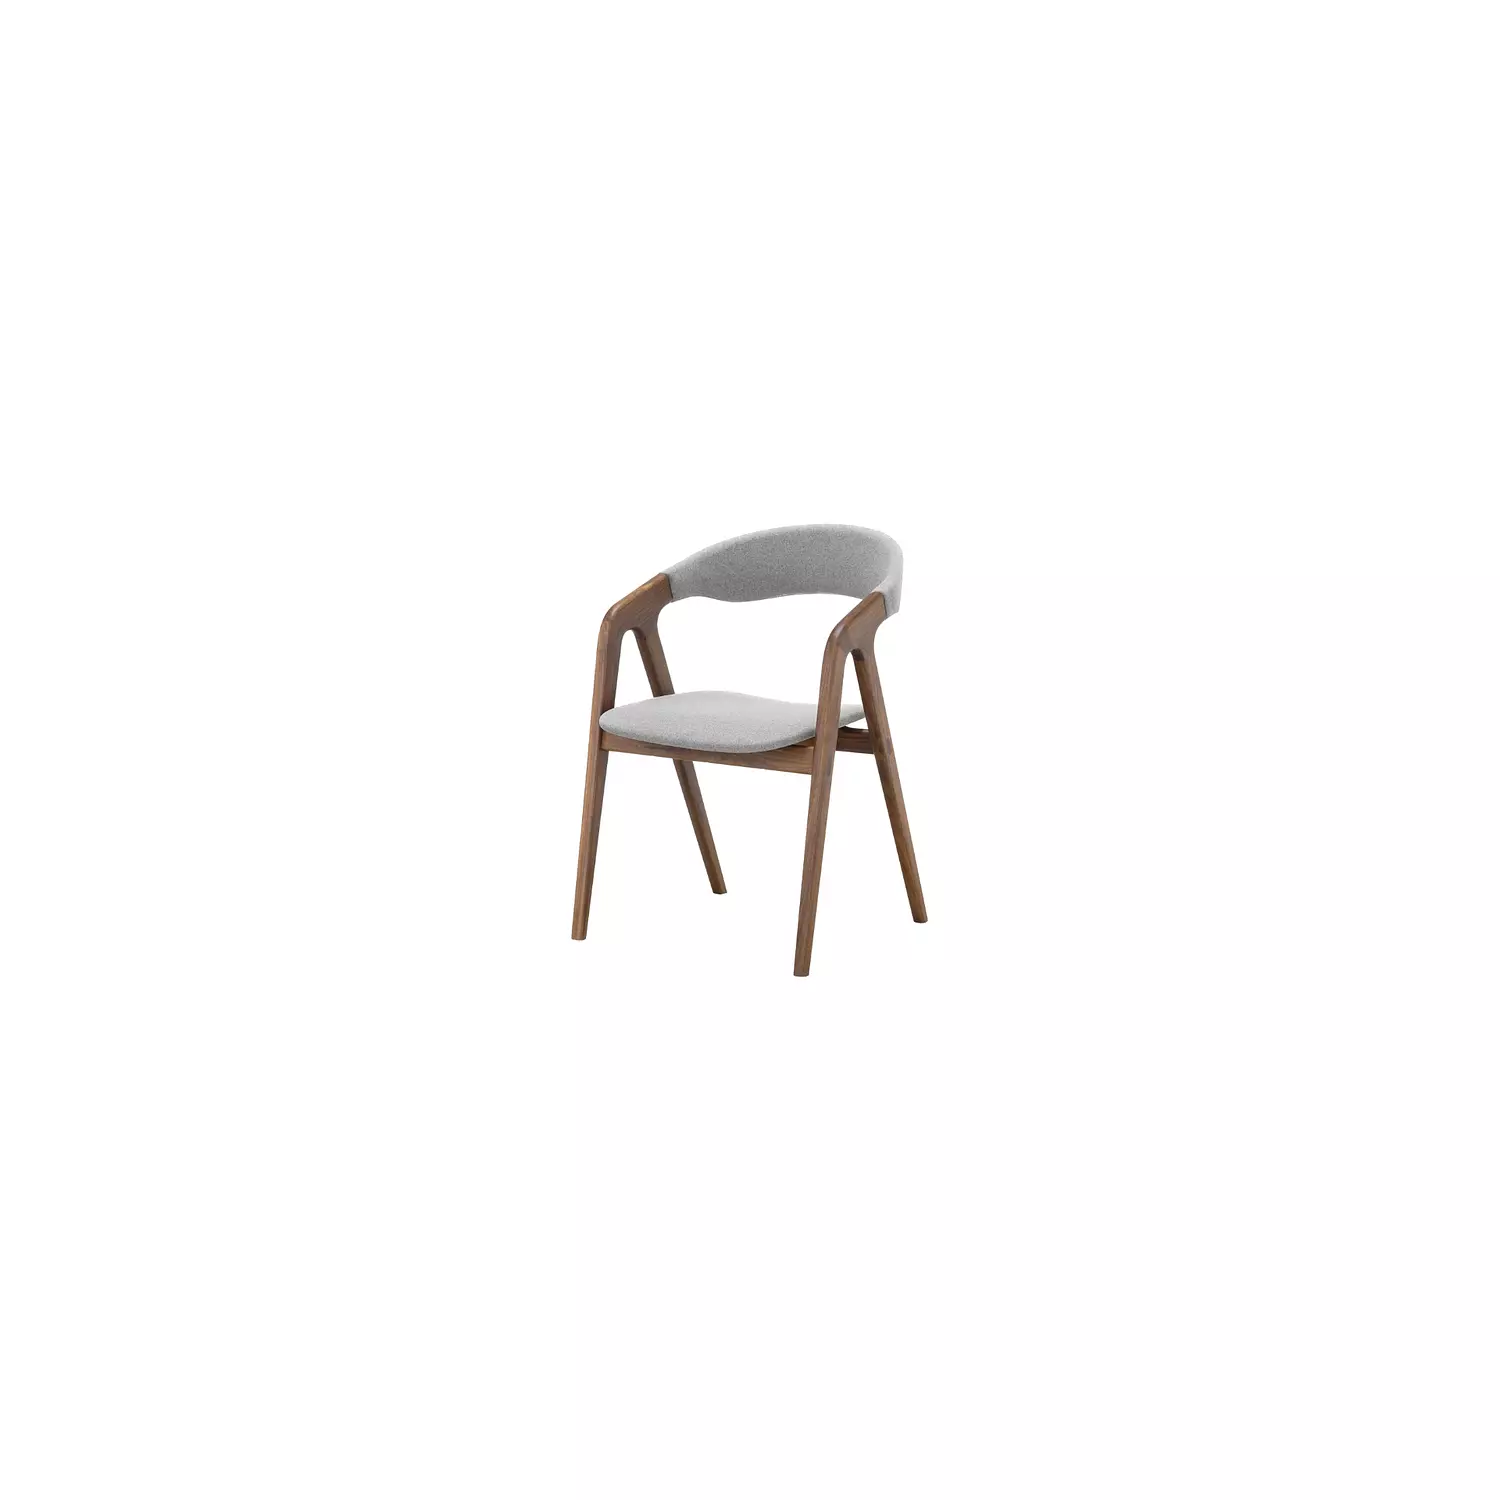 KAEDE CHAIR hover image